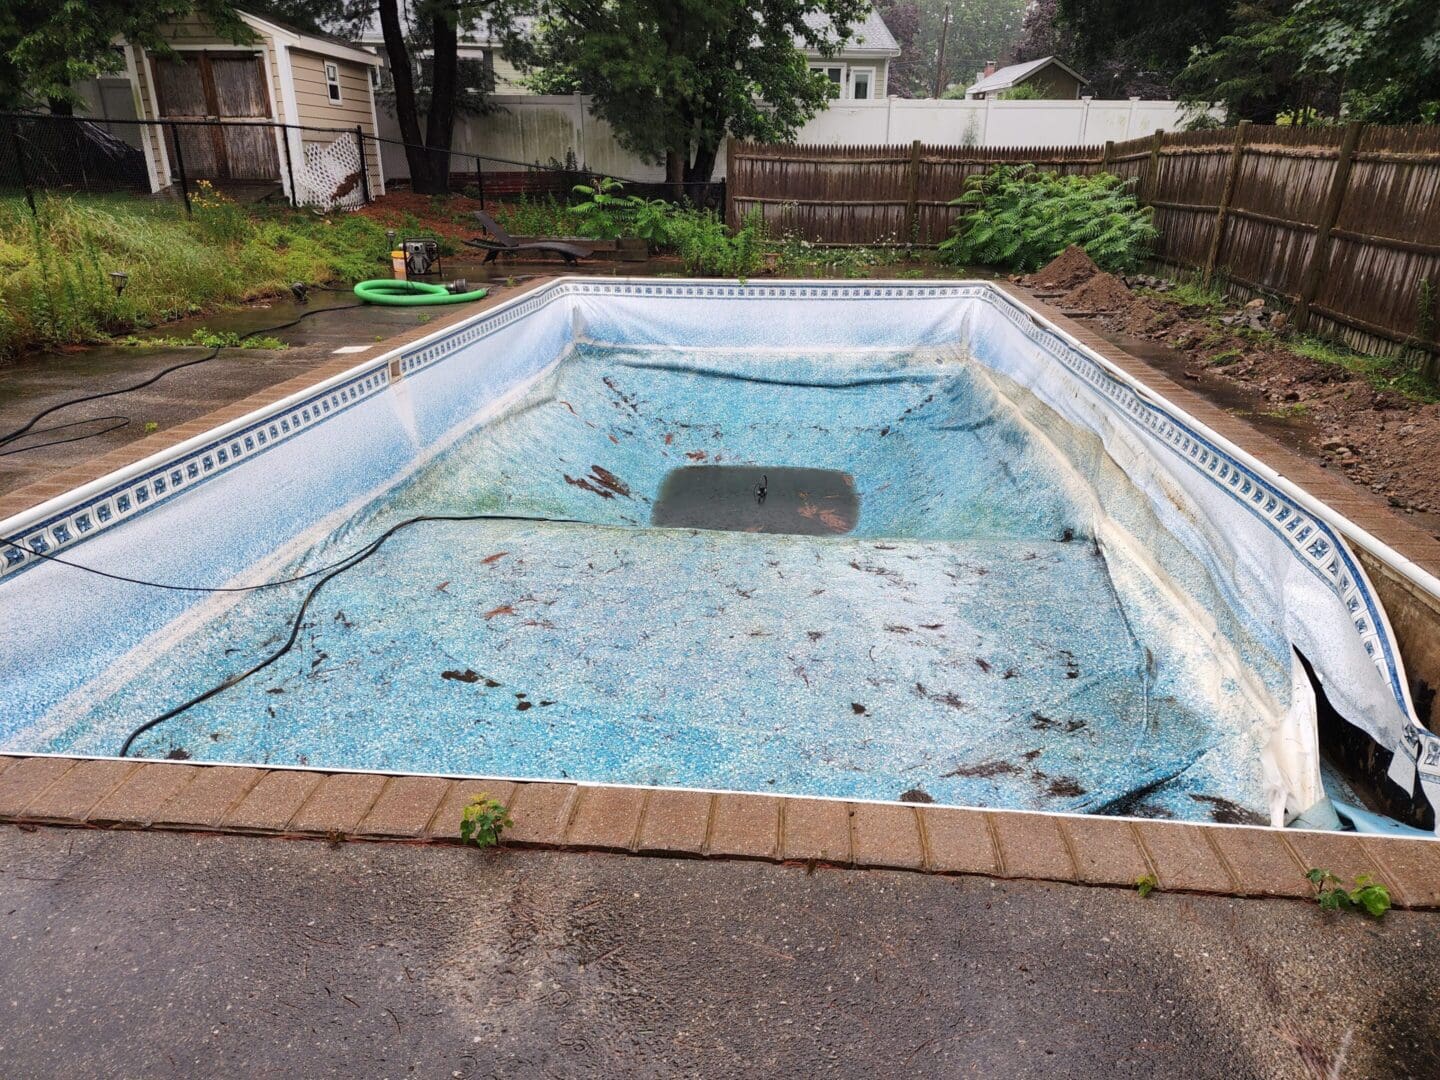 A pool that has been cleaned and is in need of repair.